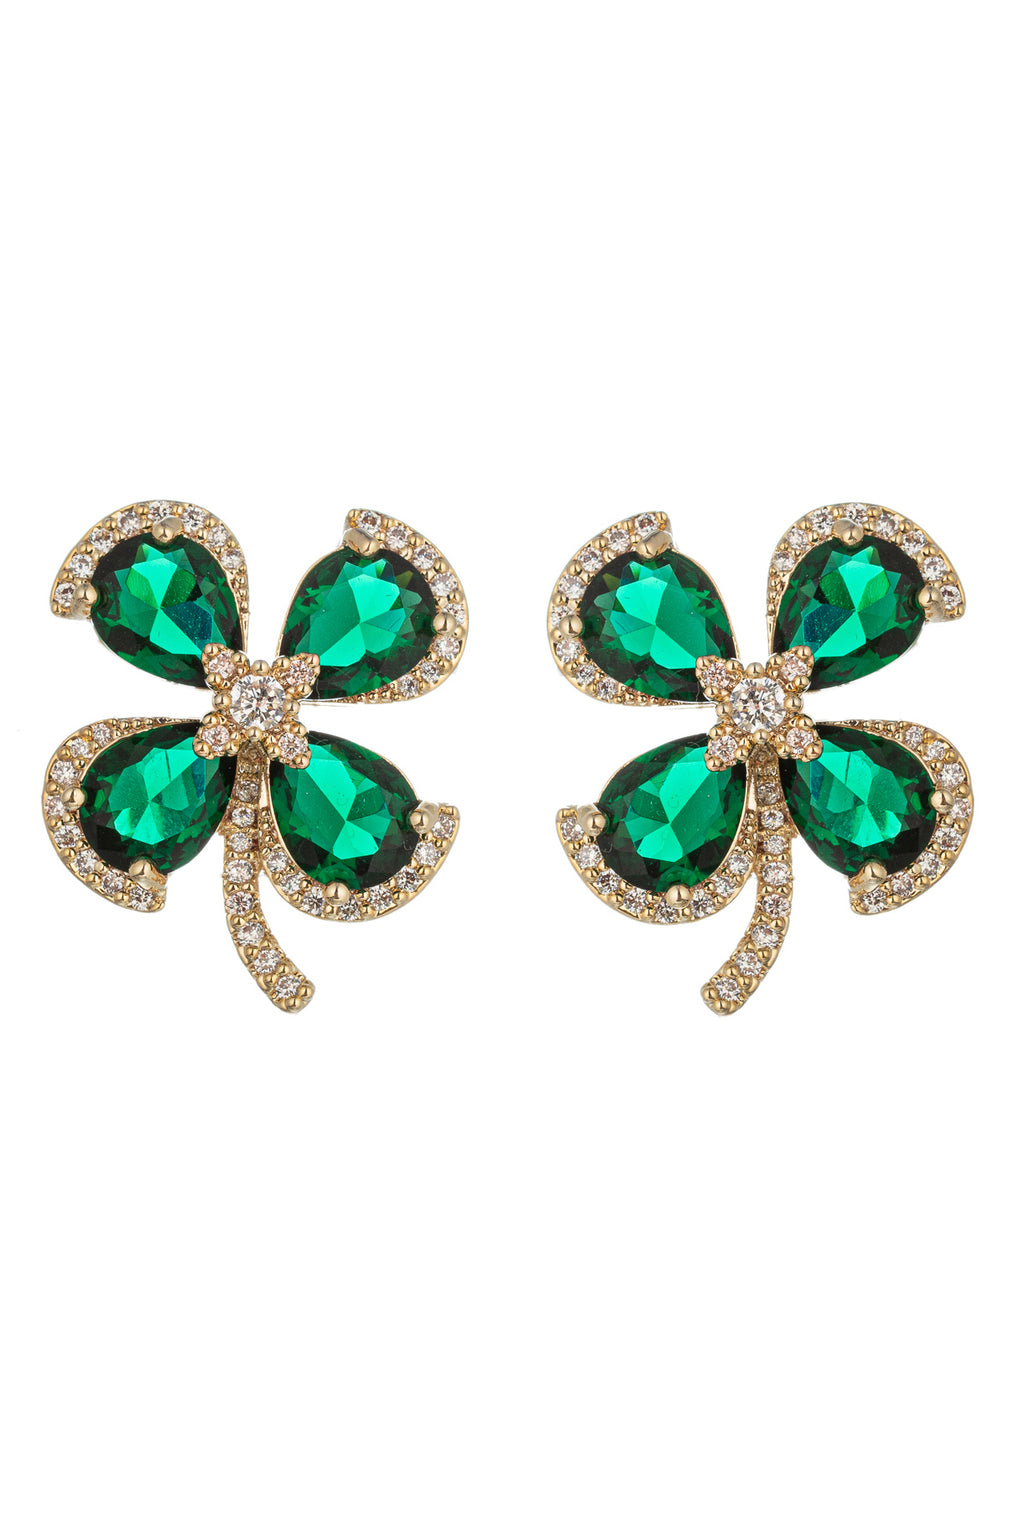 Gold tone brass 4 leaf clover green stud earrings studded with CZ crystals.